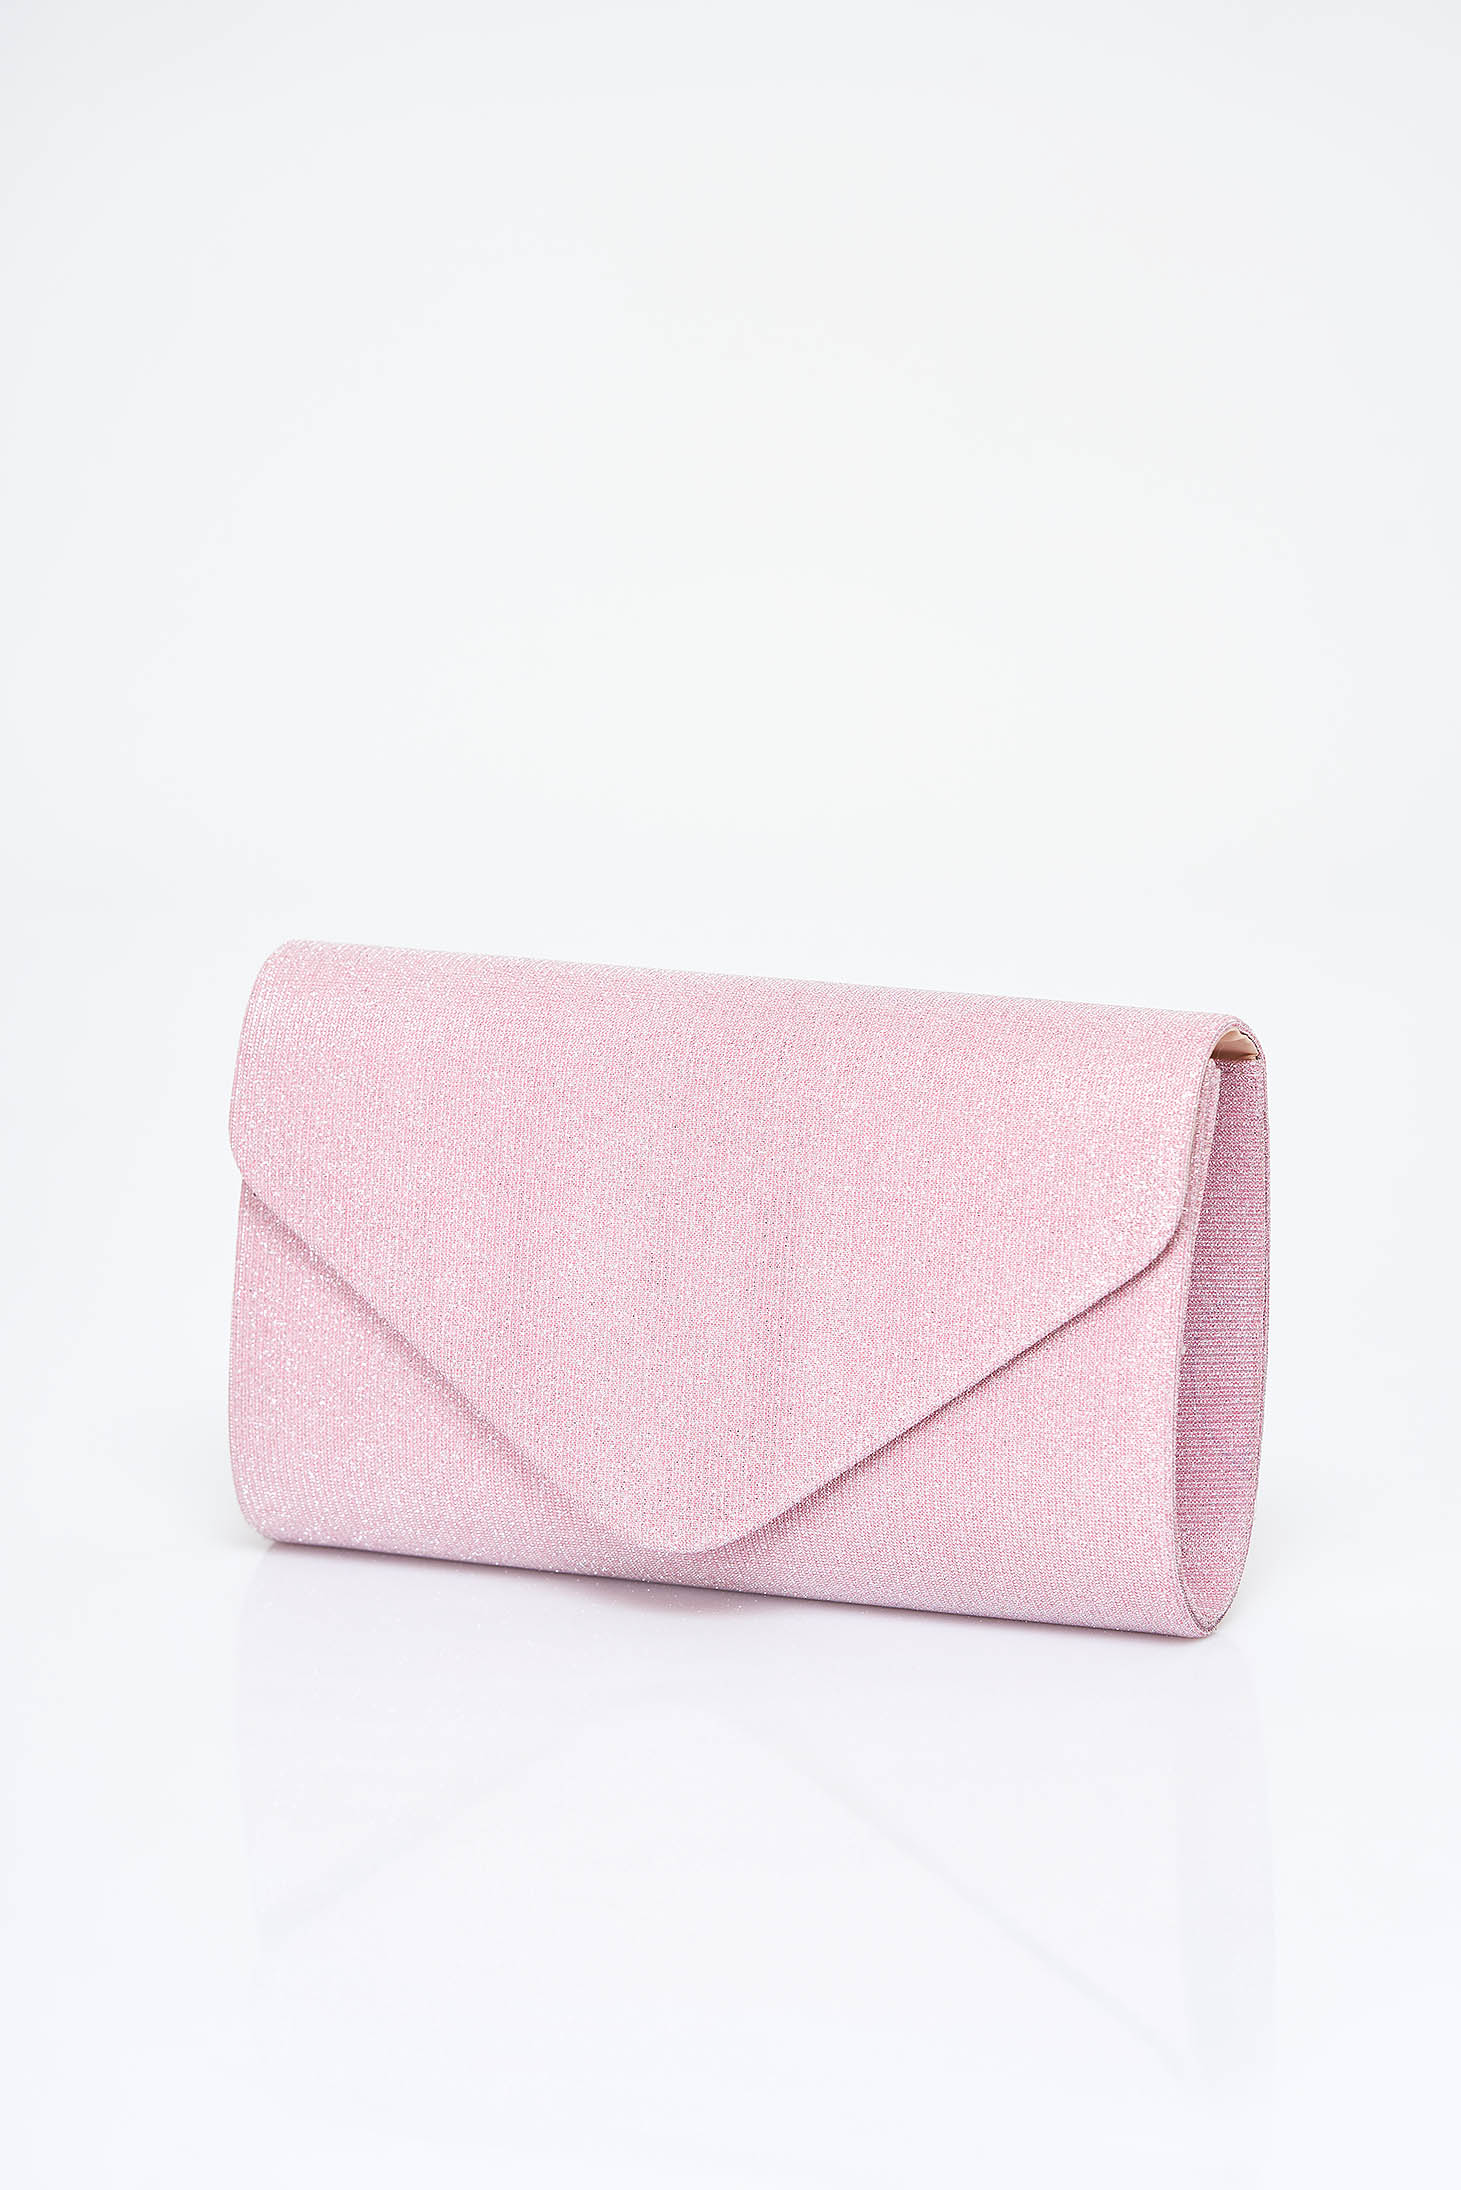 Light Pink Clutch Bag for Women with Glitter Applications 2 - StarShinerS.com